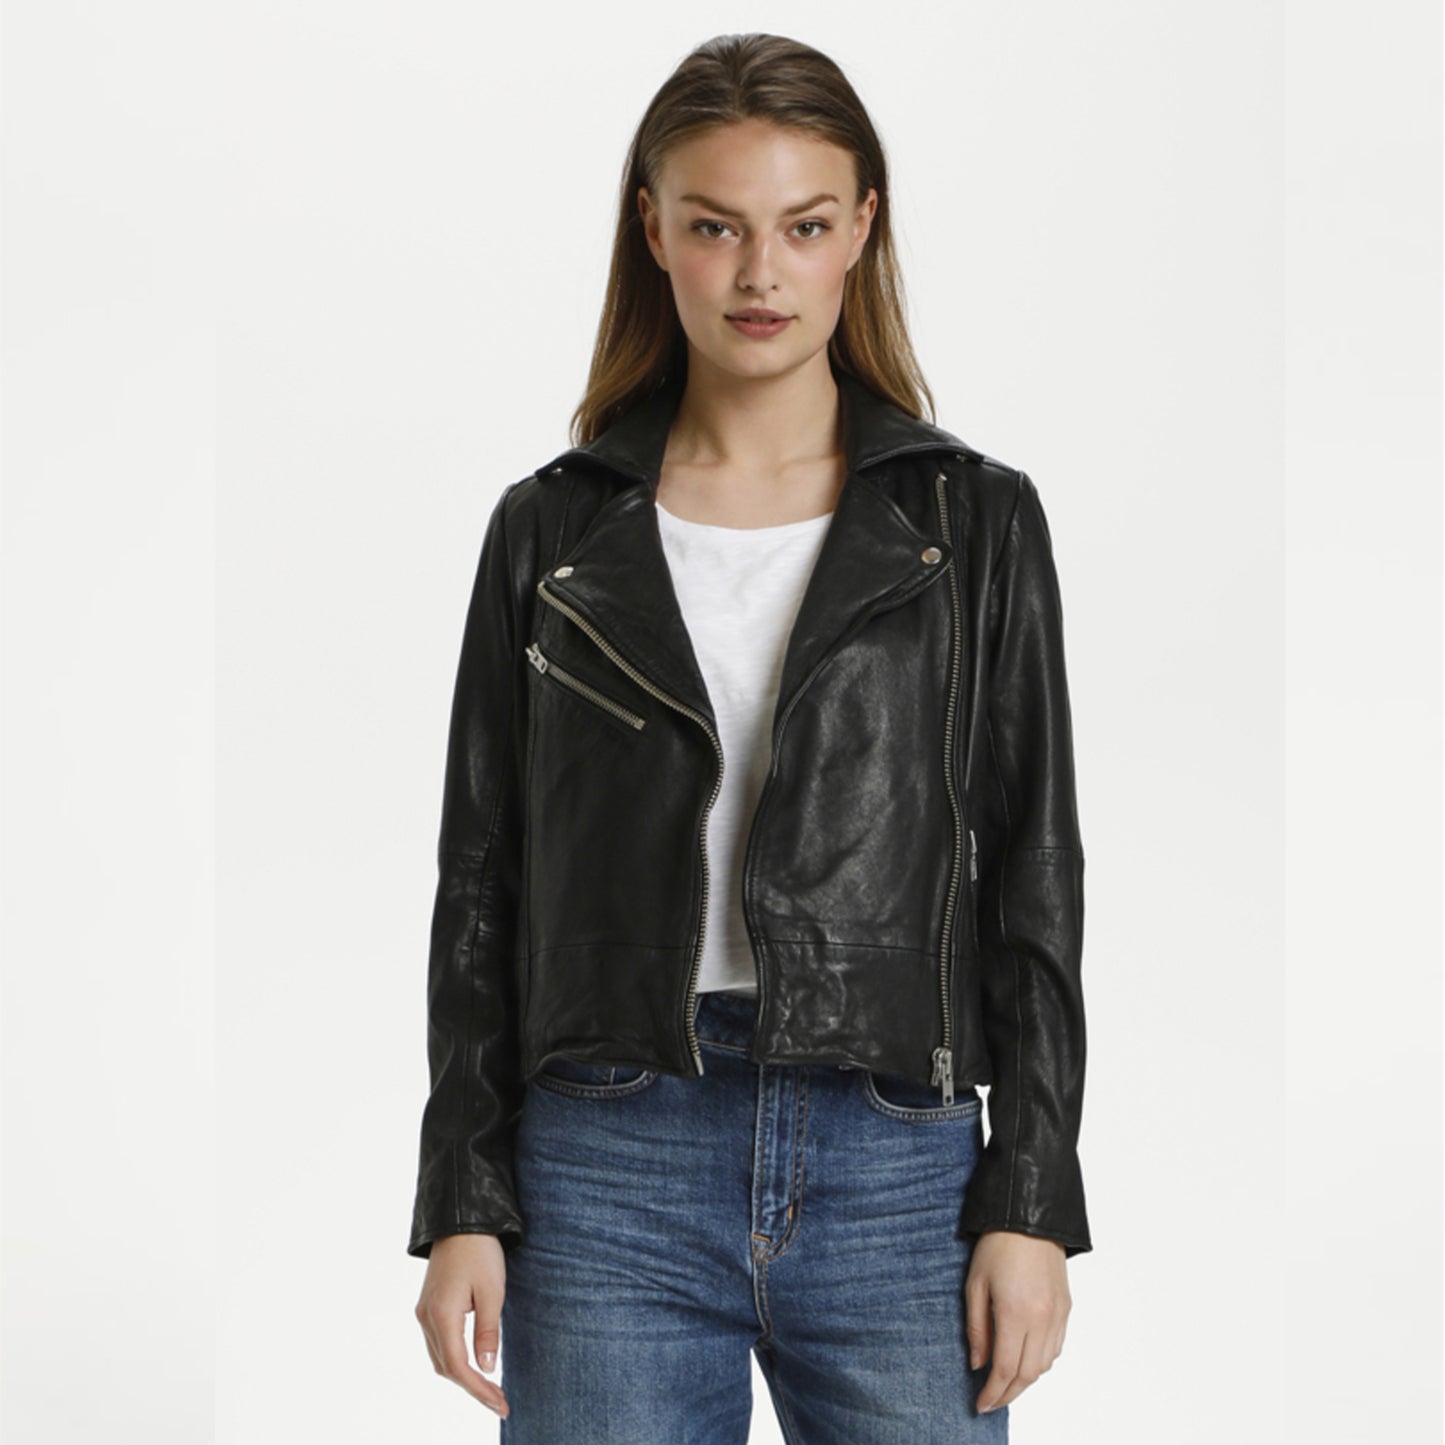 The Leather Jacket